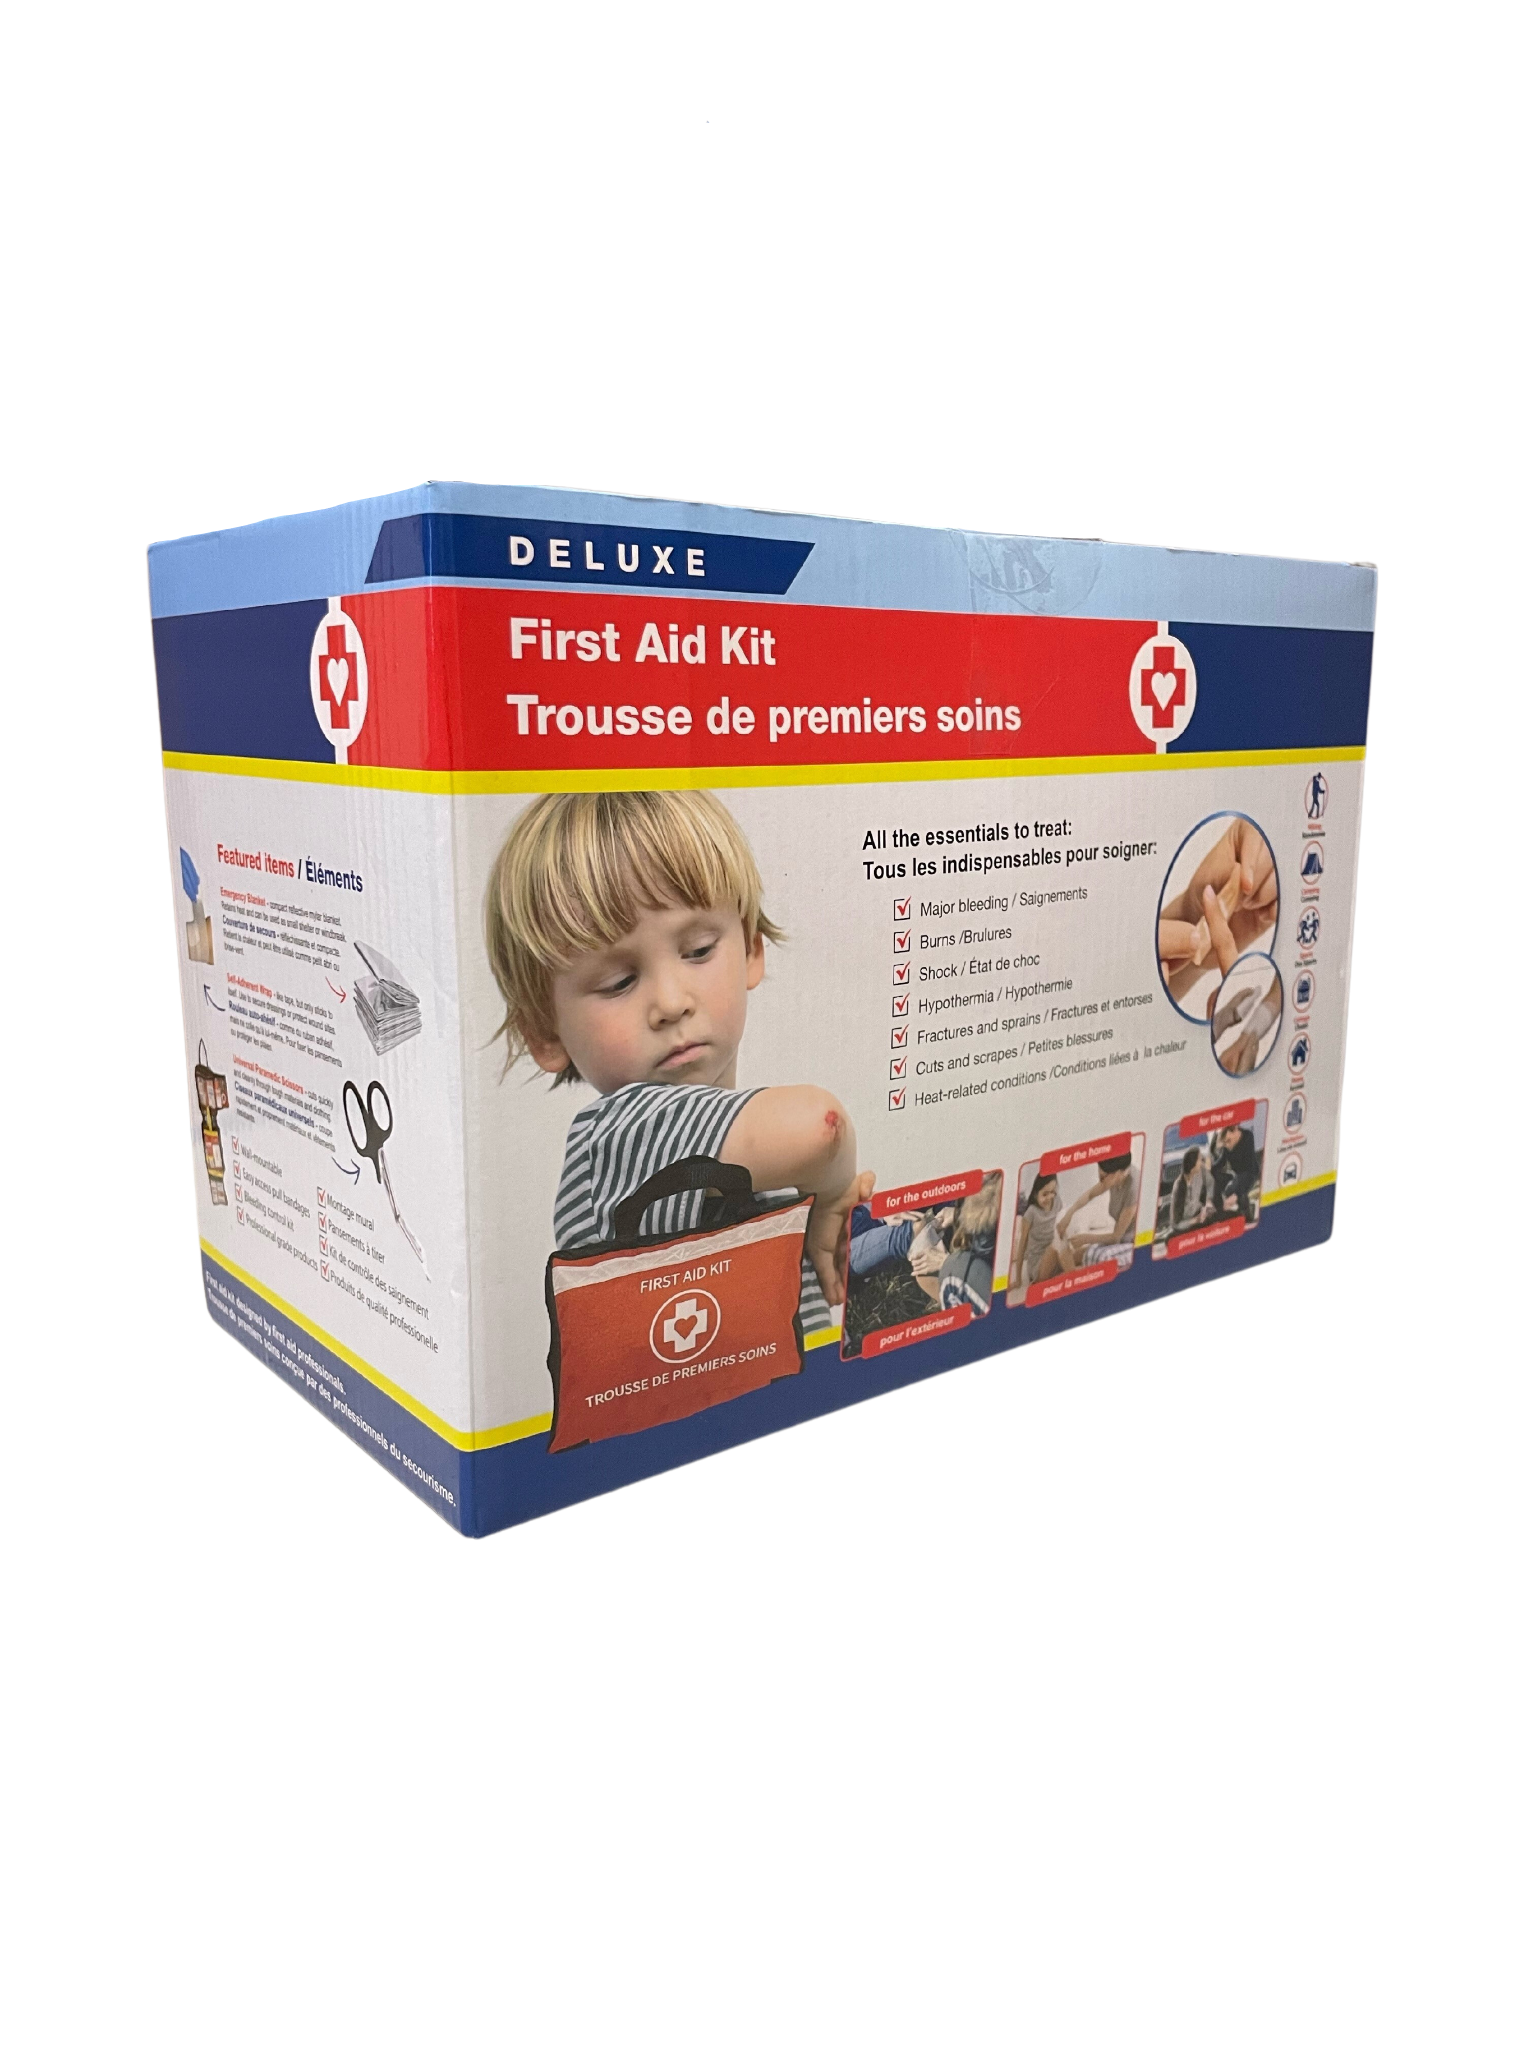 Alert Deluxe First Aid Kit